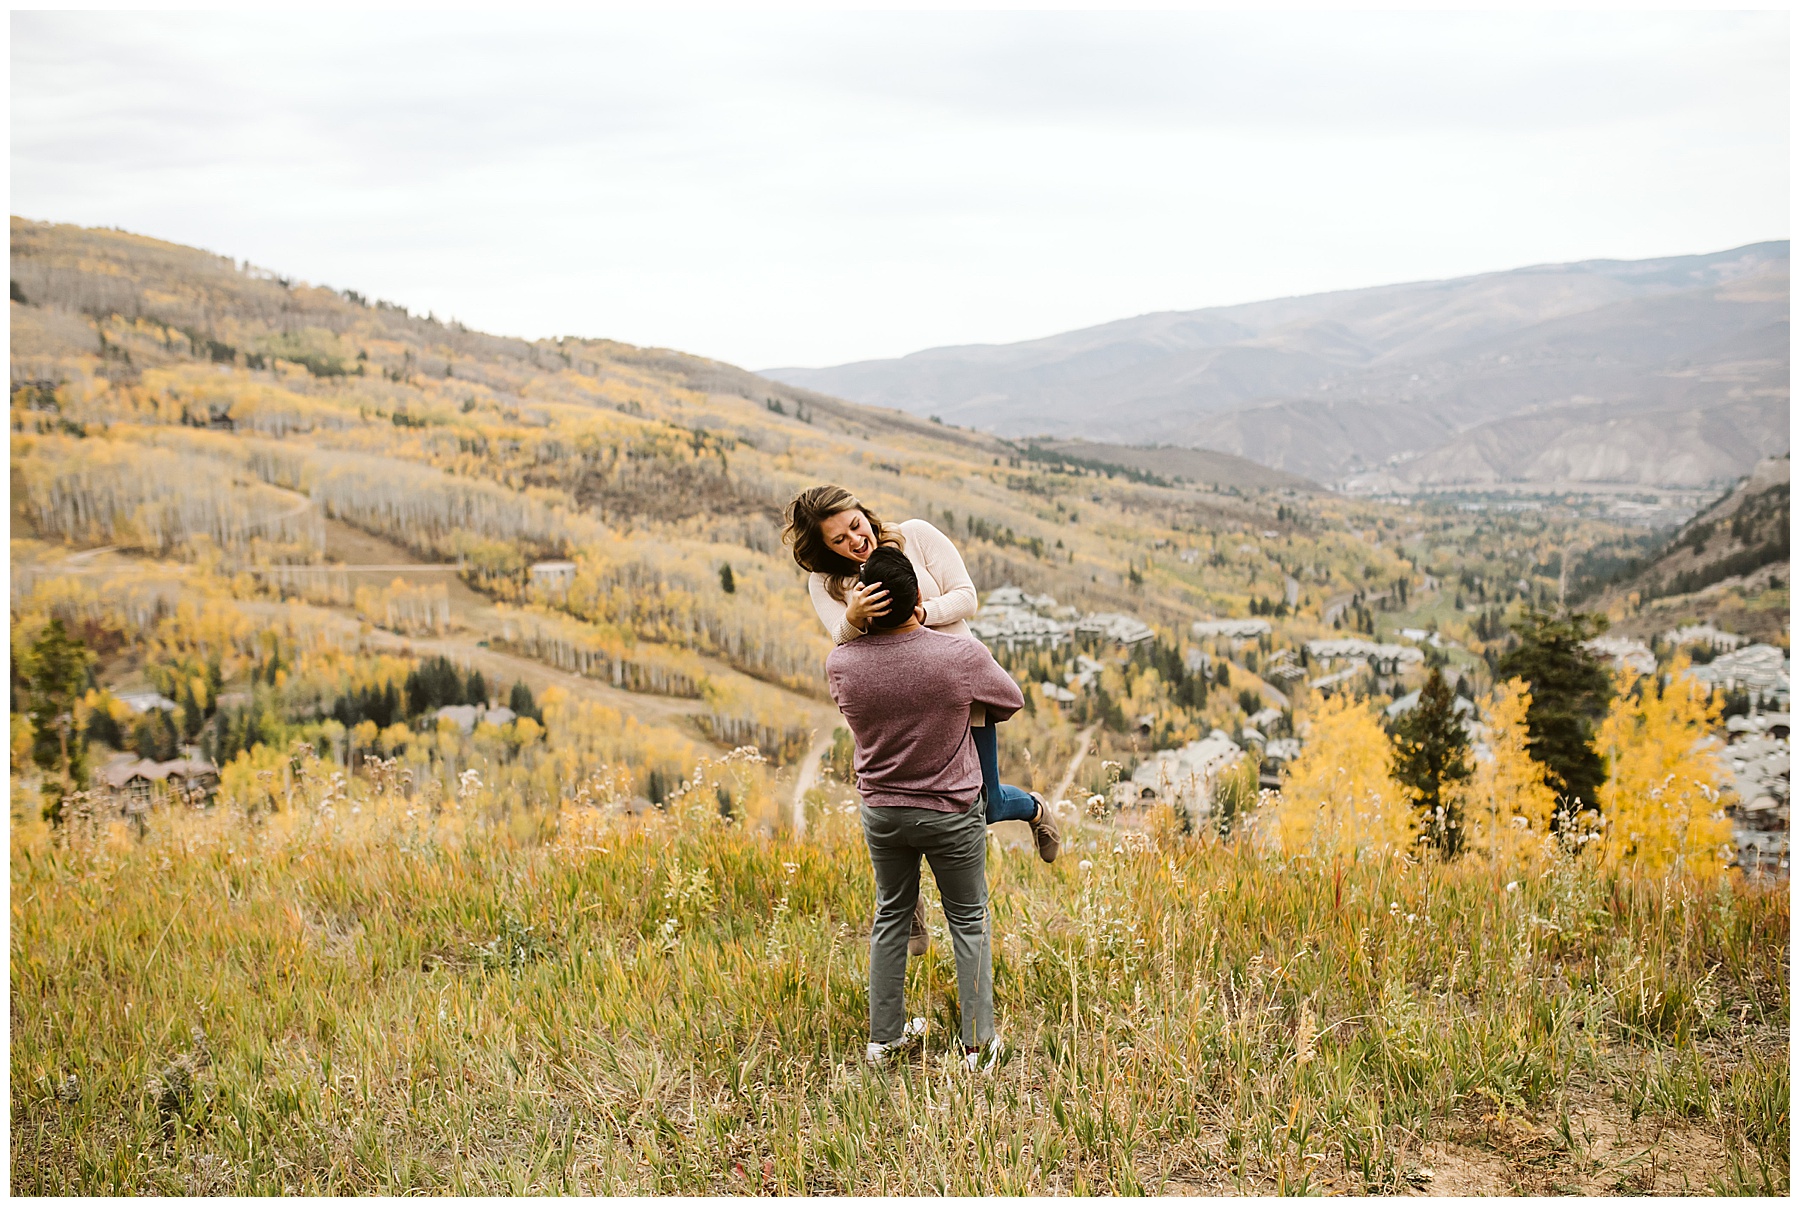 man picking up woman in landscape photo with fall aspen forest in the background, a perfect engagement photos location